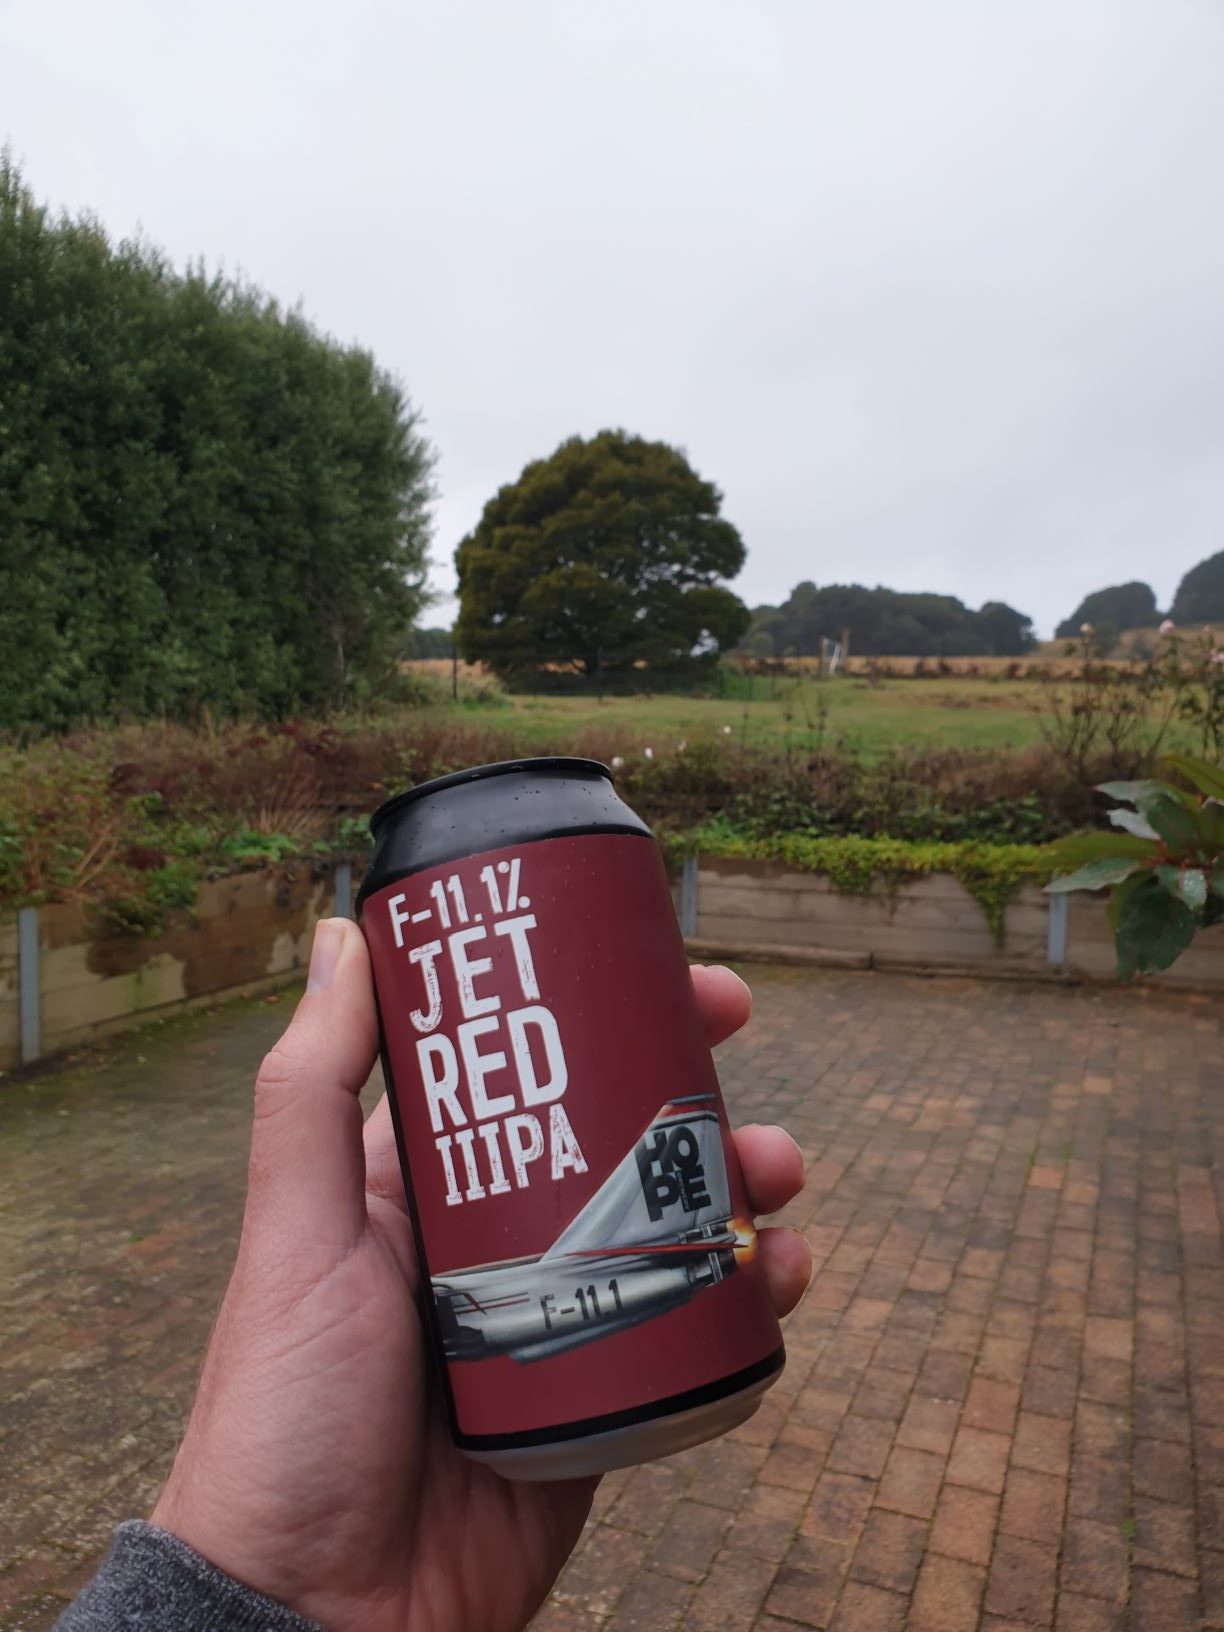 F-11.1% Jet Red IIIPA by Hope Brewery